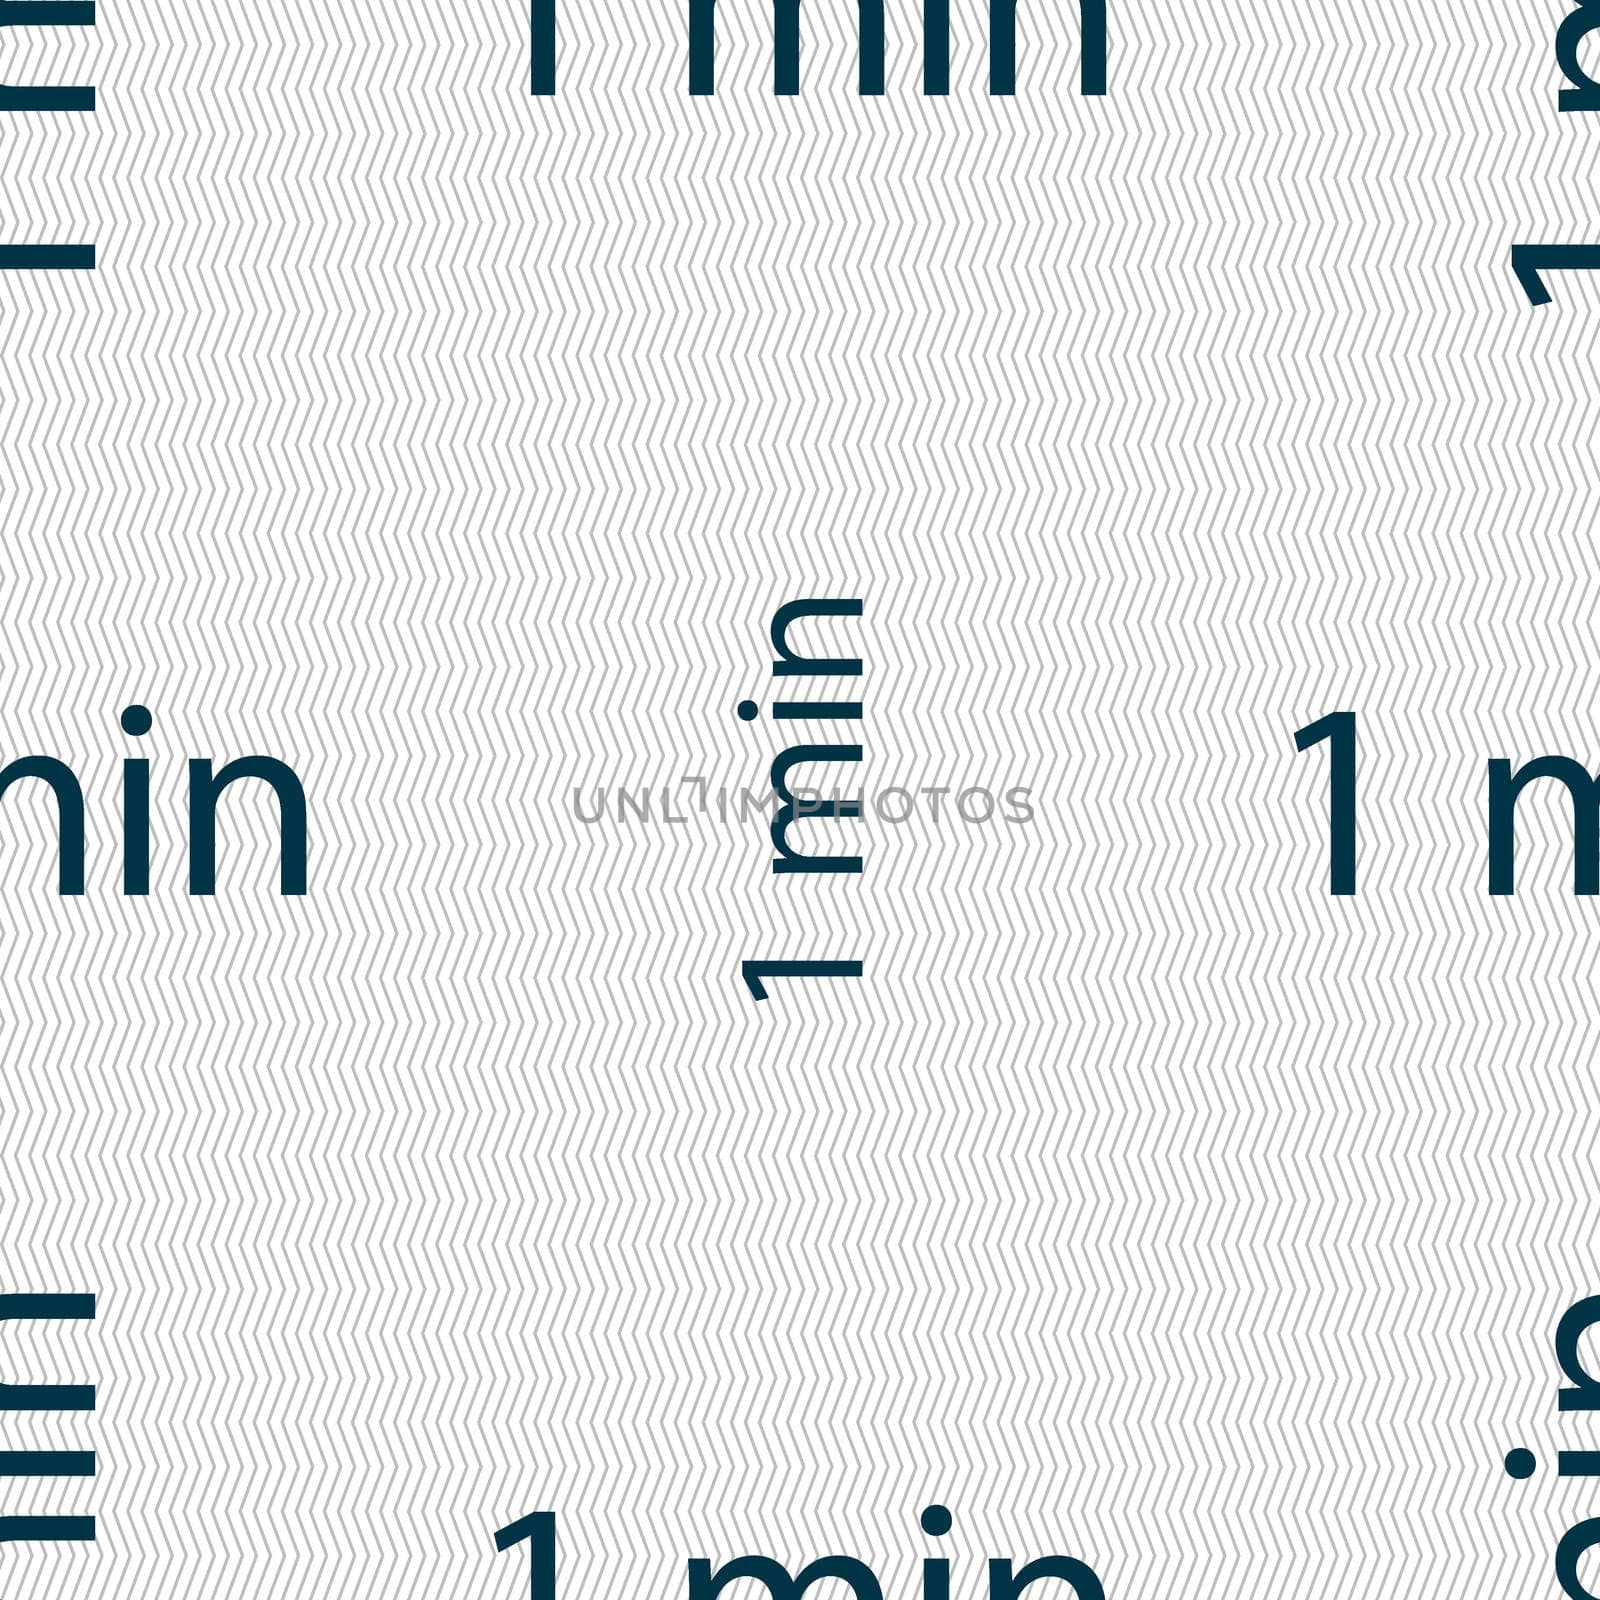 1 minutes sign icon. Seamless abstract background with geometric shapes. illustration